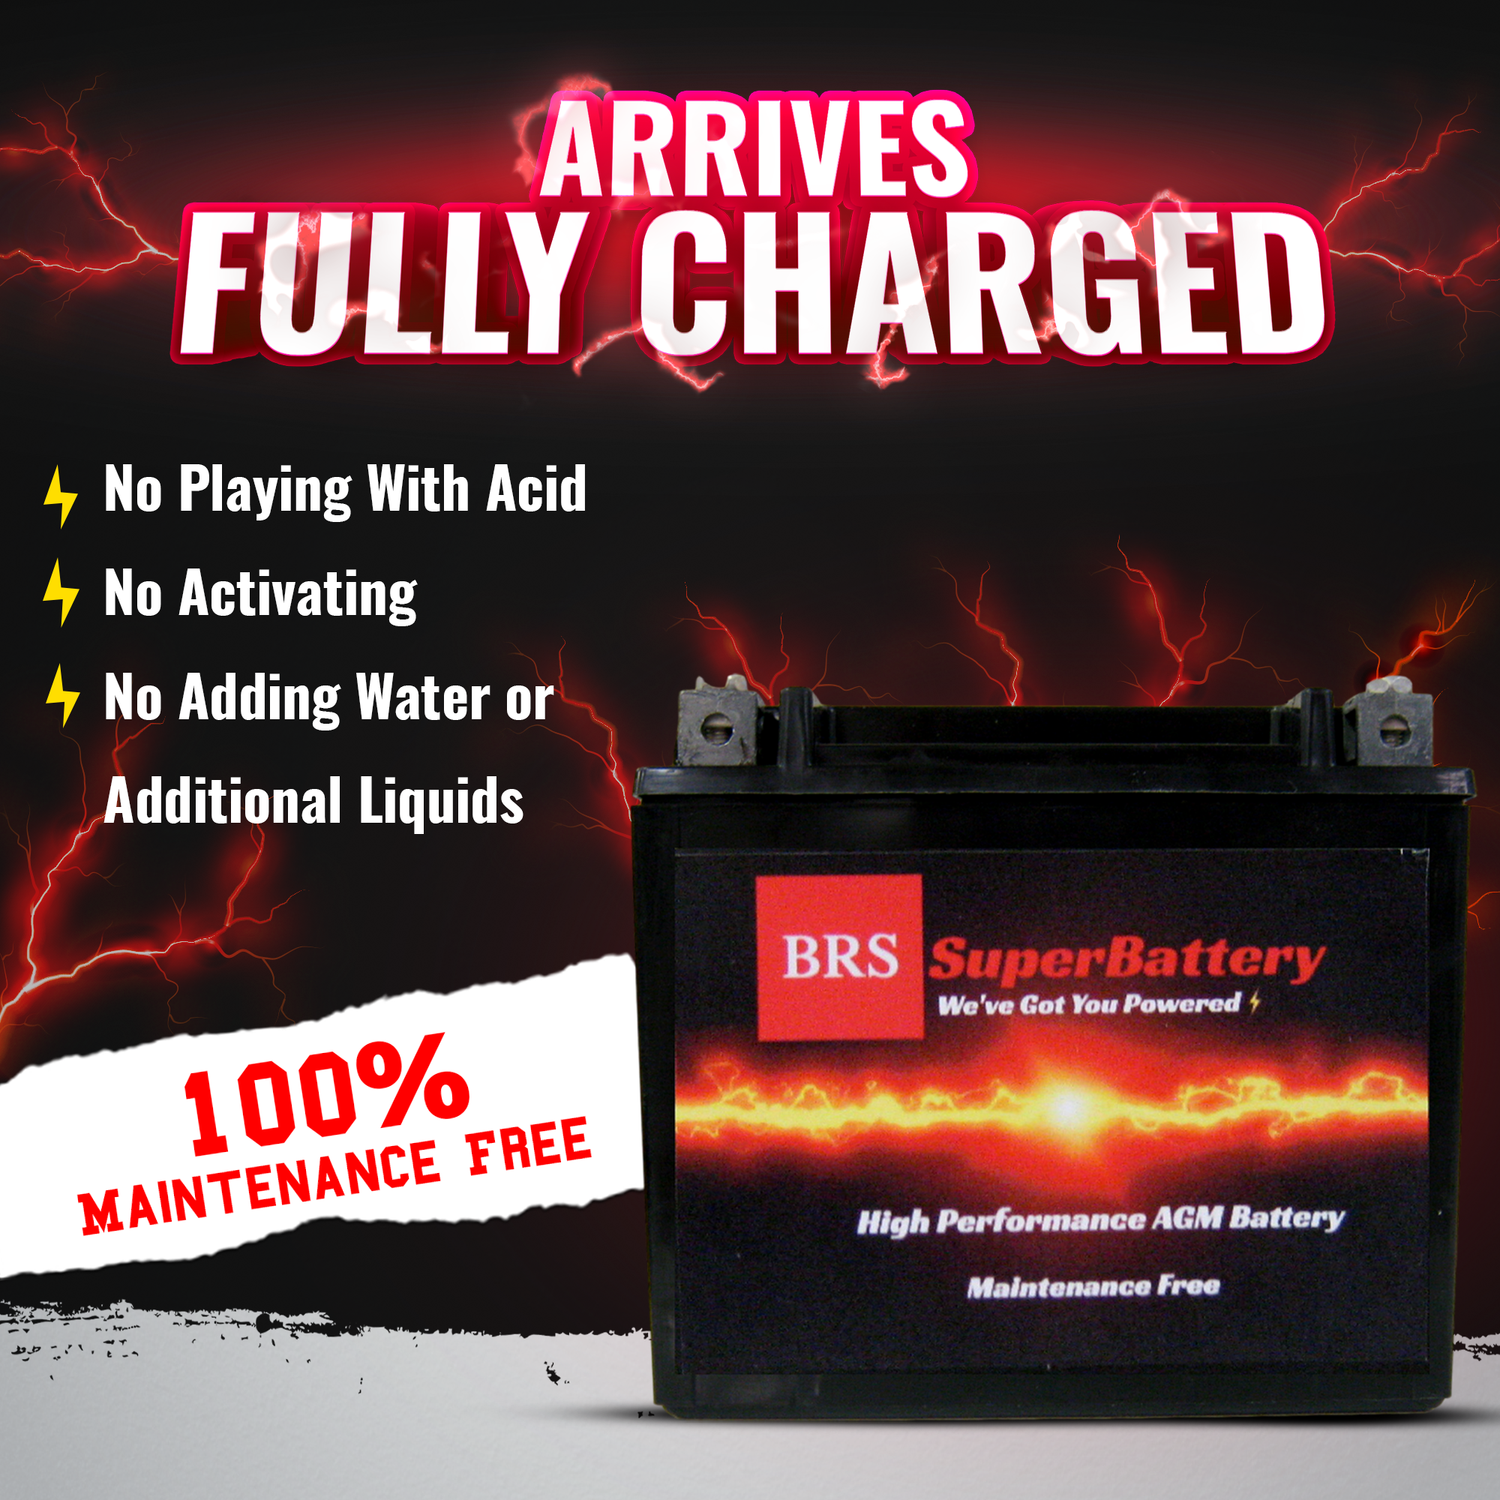 High Performance BRS14AH-BS 10 Year Battery & Smart Charger / Maintainer Combo Bundle Kit 12v Sealed AGM PowerSports Battery - BRS Super Battery